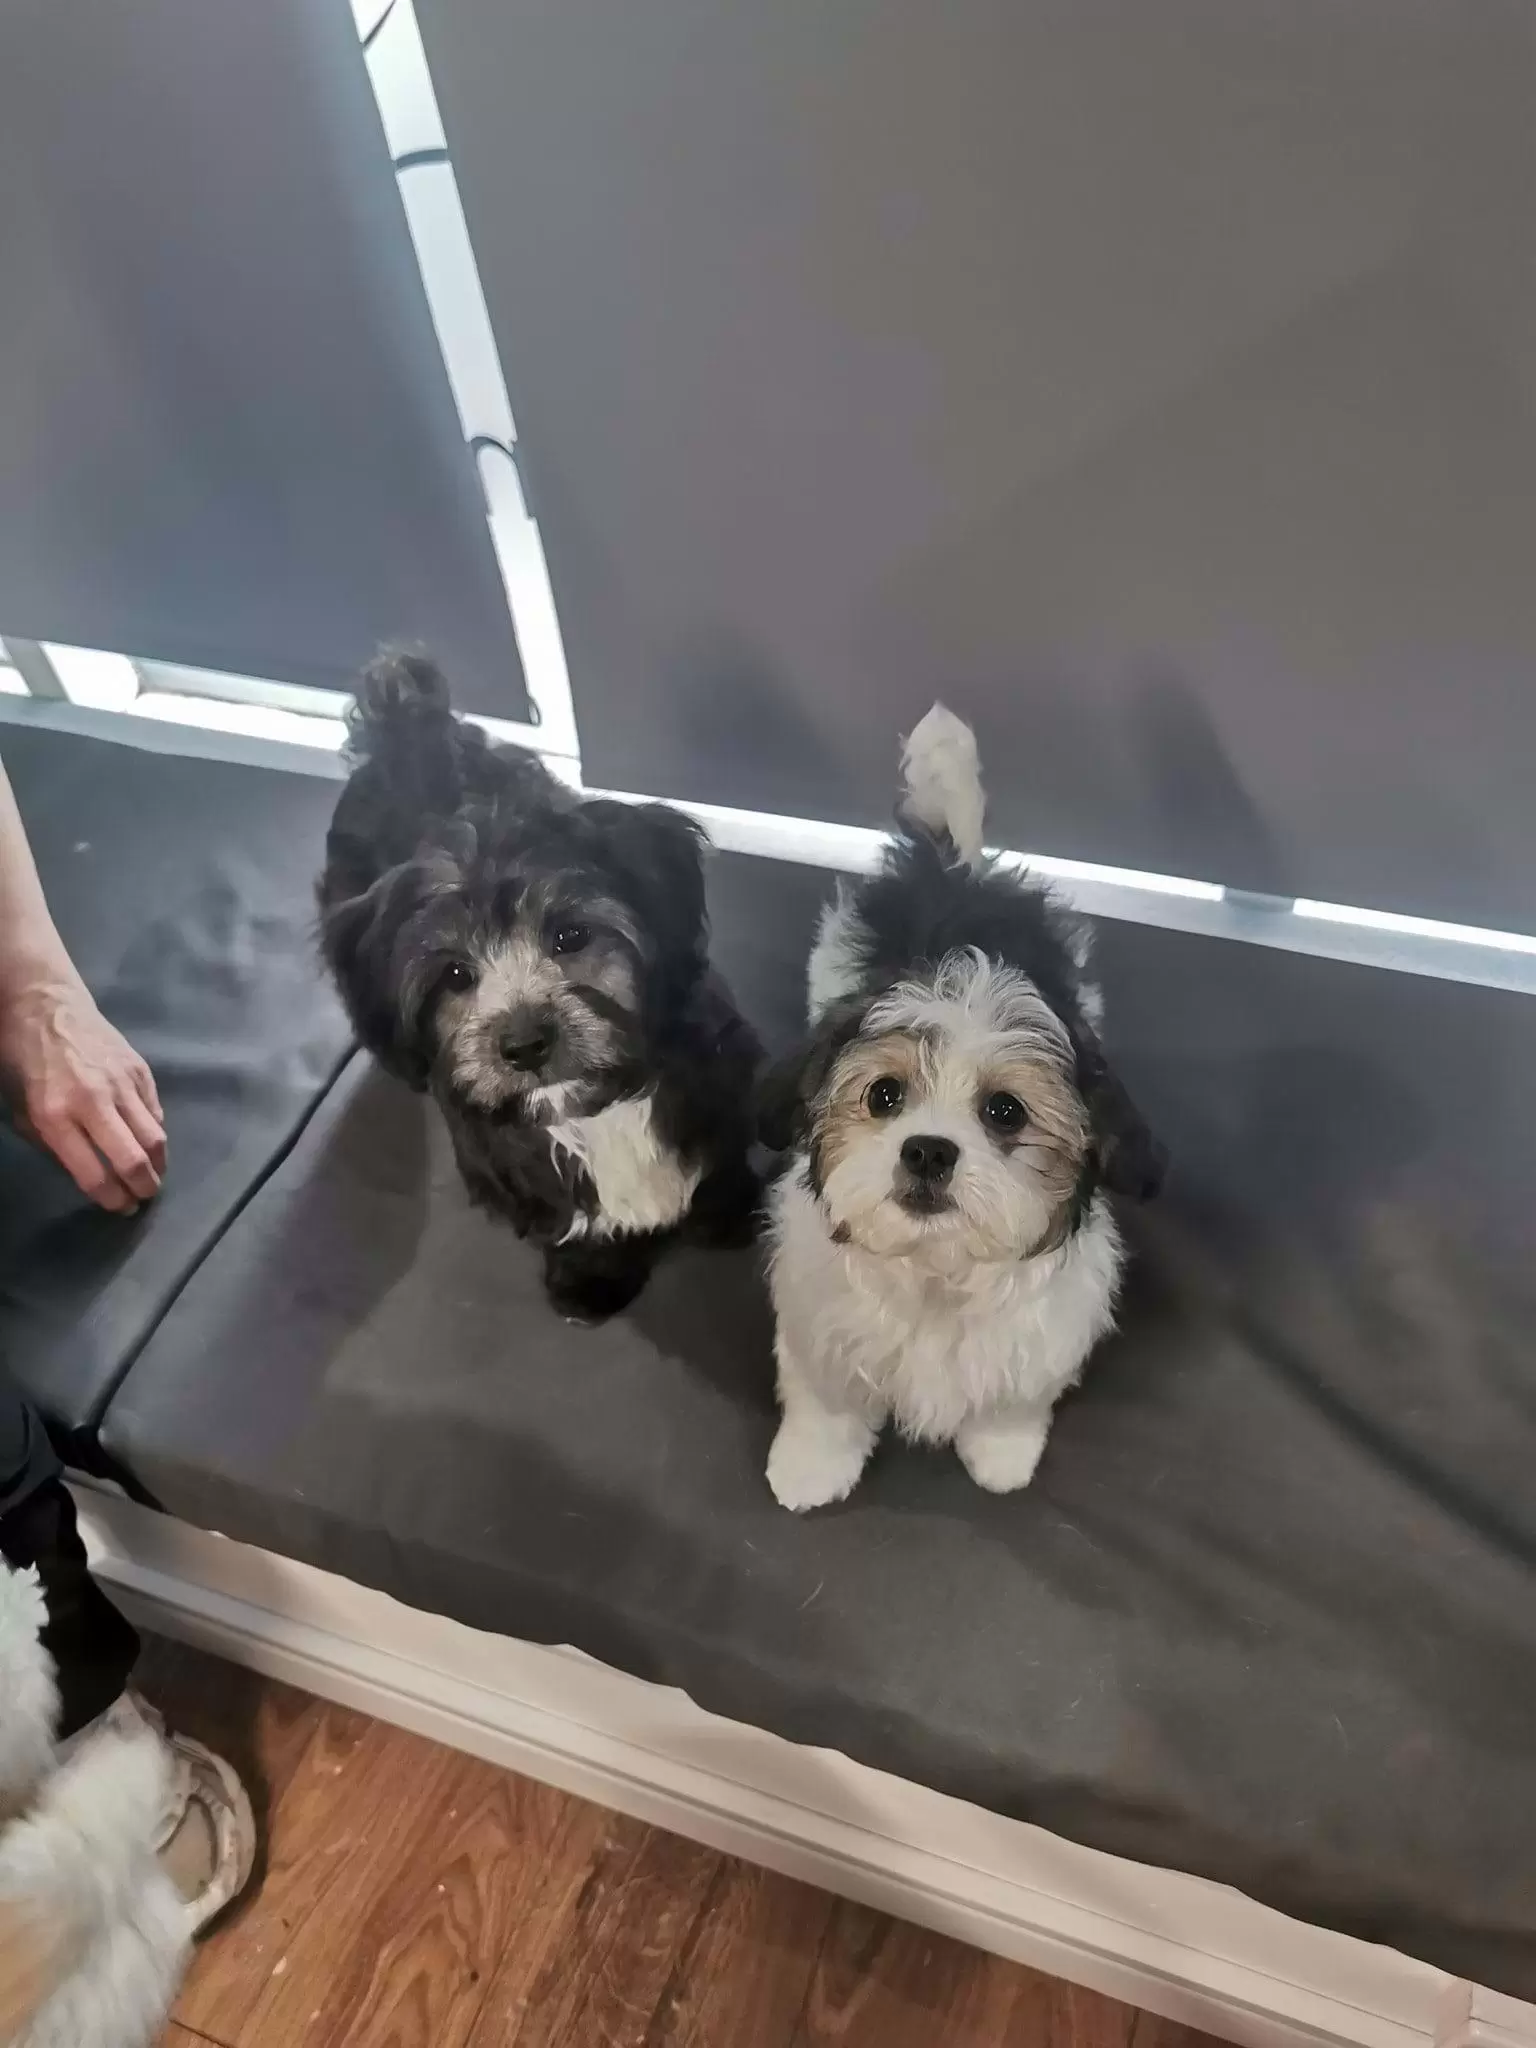 Two dogs standing of the cushioned bench in the shop, looking directly at the camera; very fluffy